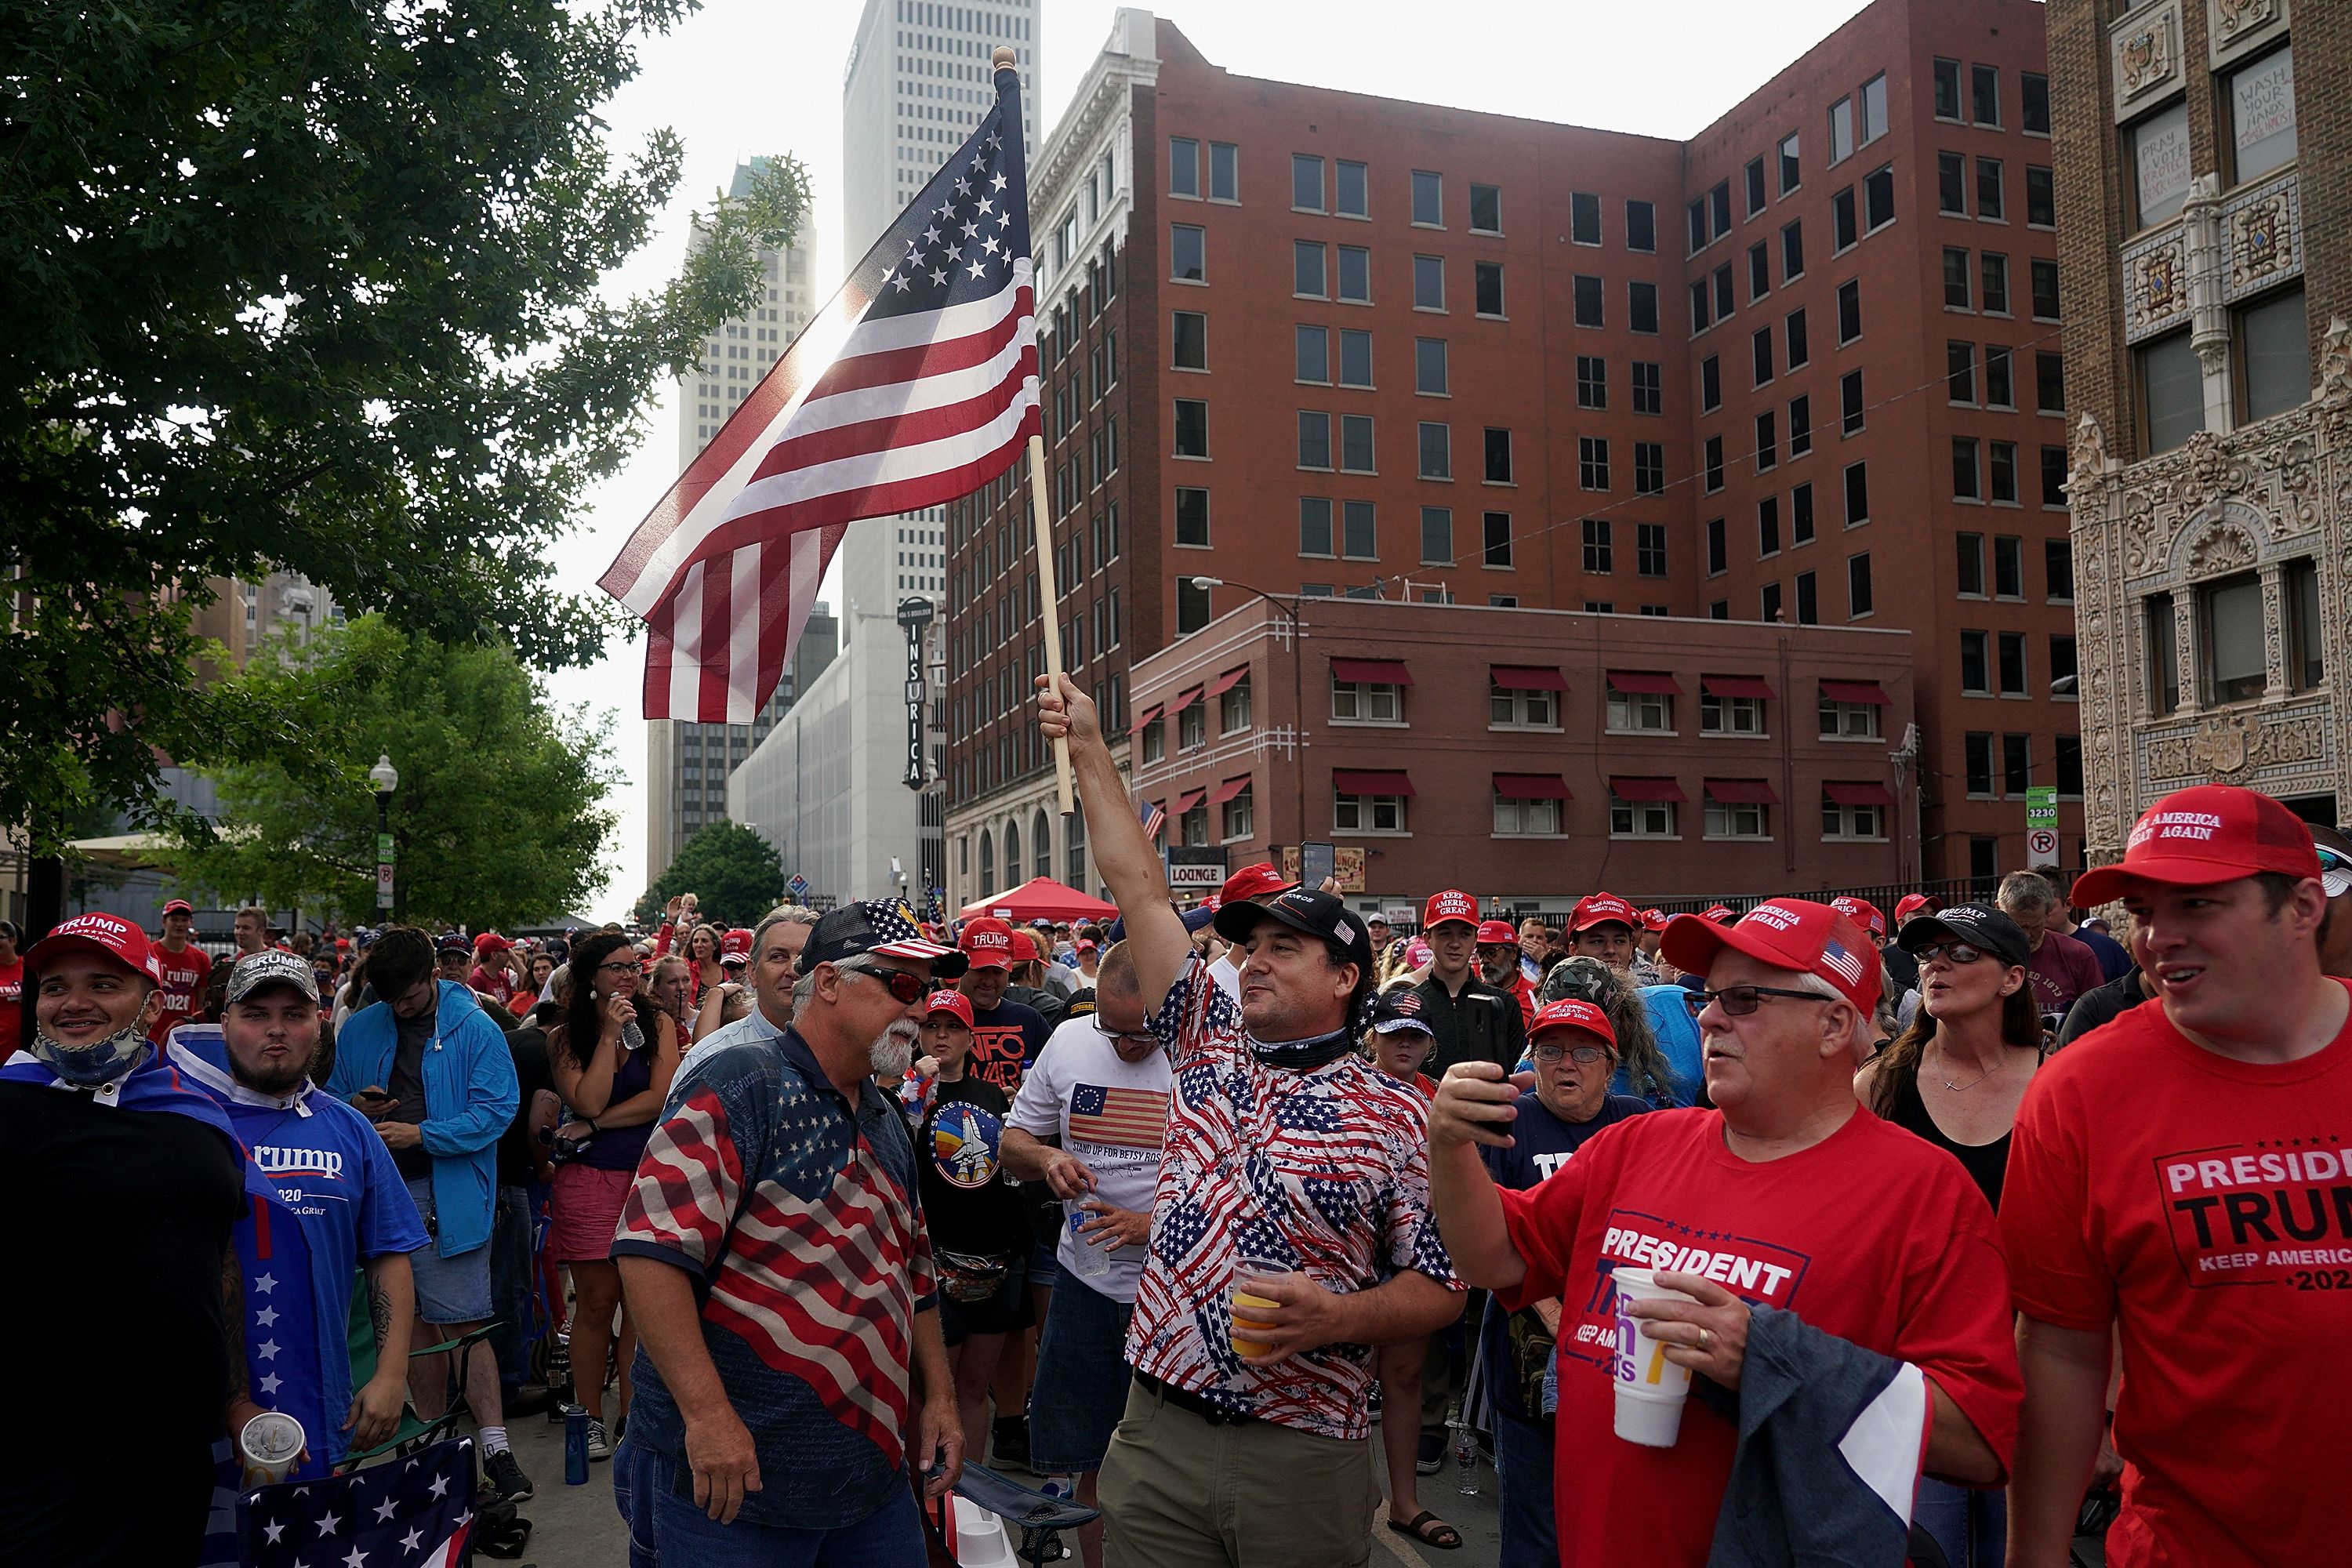 A man holds an American flag above a crowd